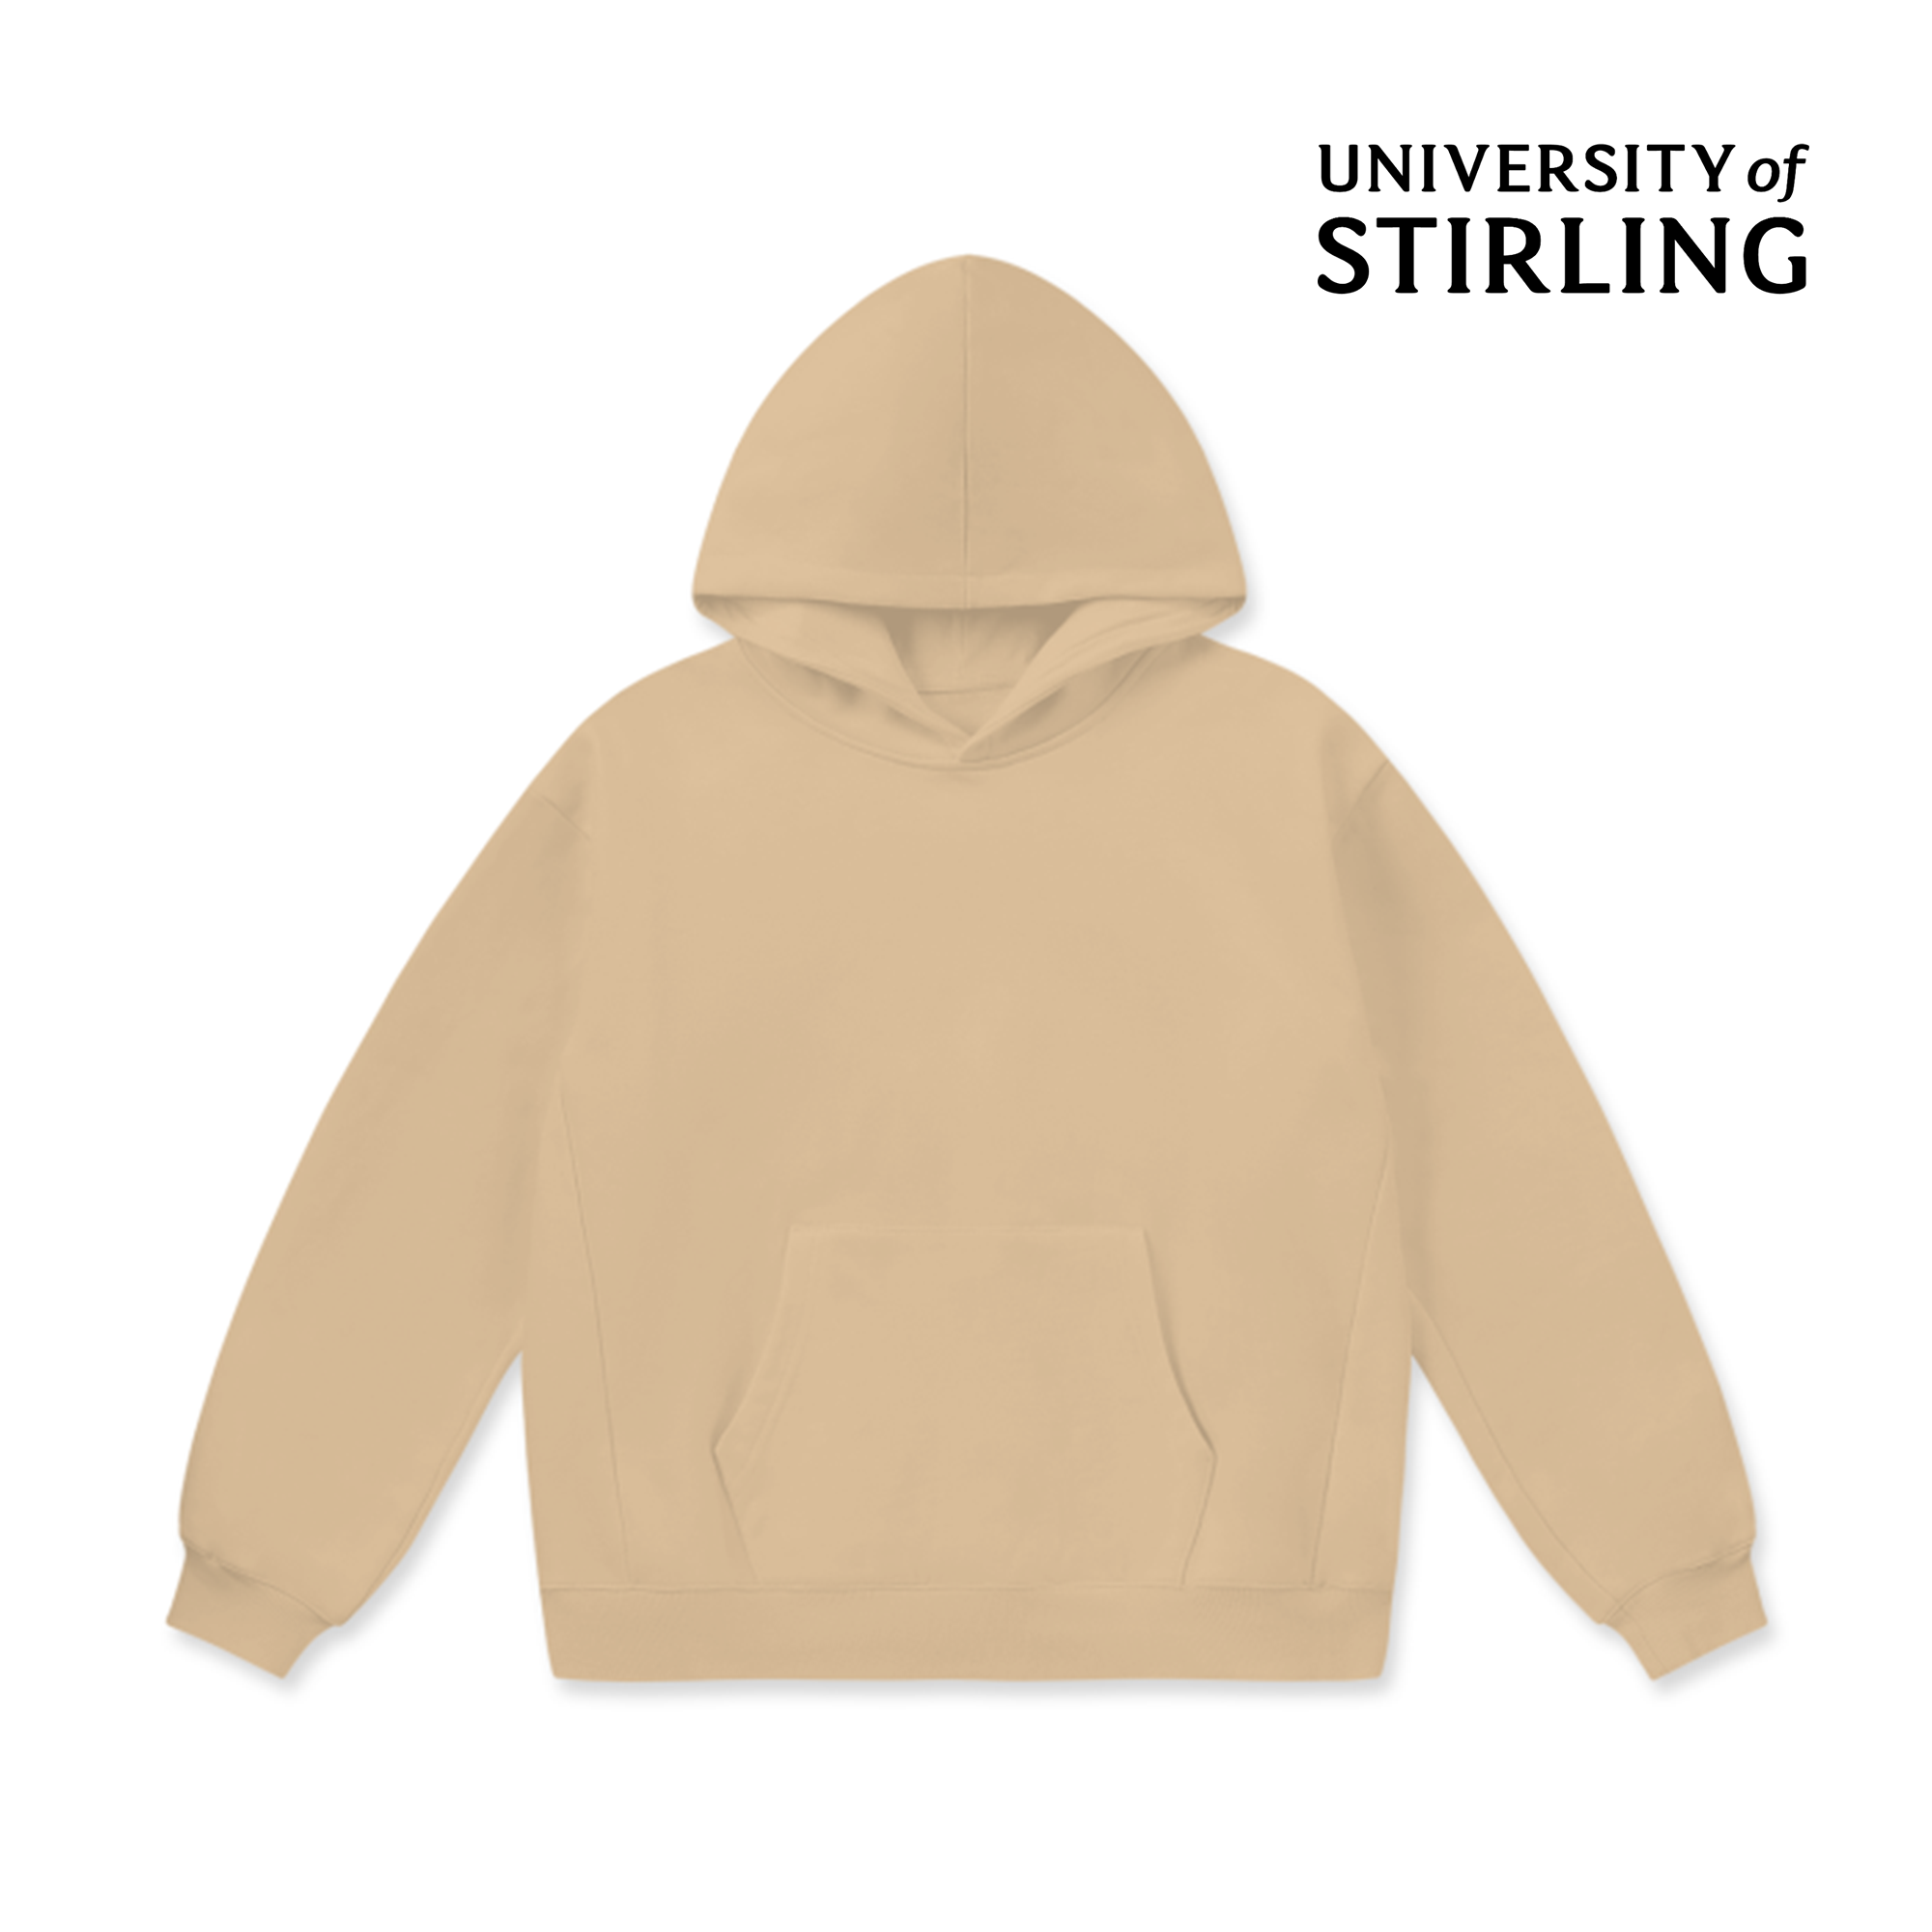 LCC Super Weighted Hoodie - University of Stirling (Modern)